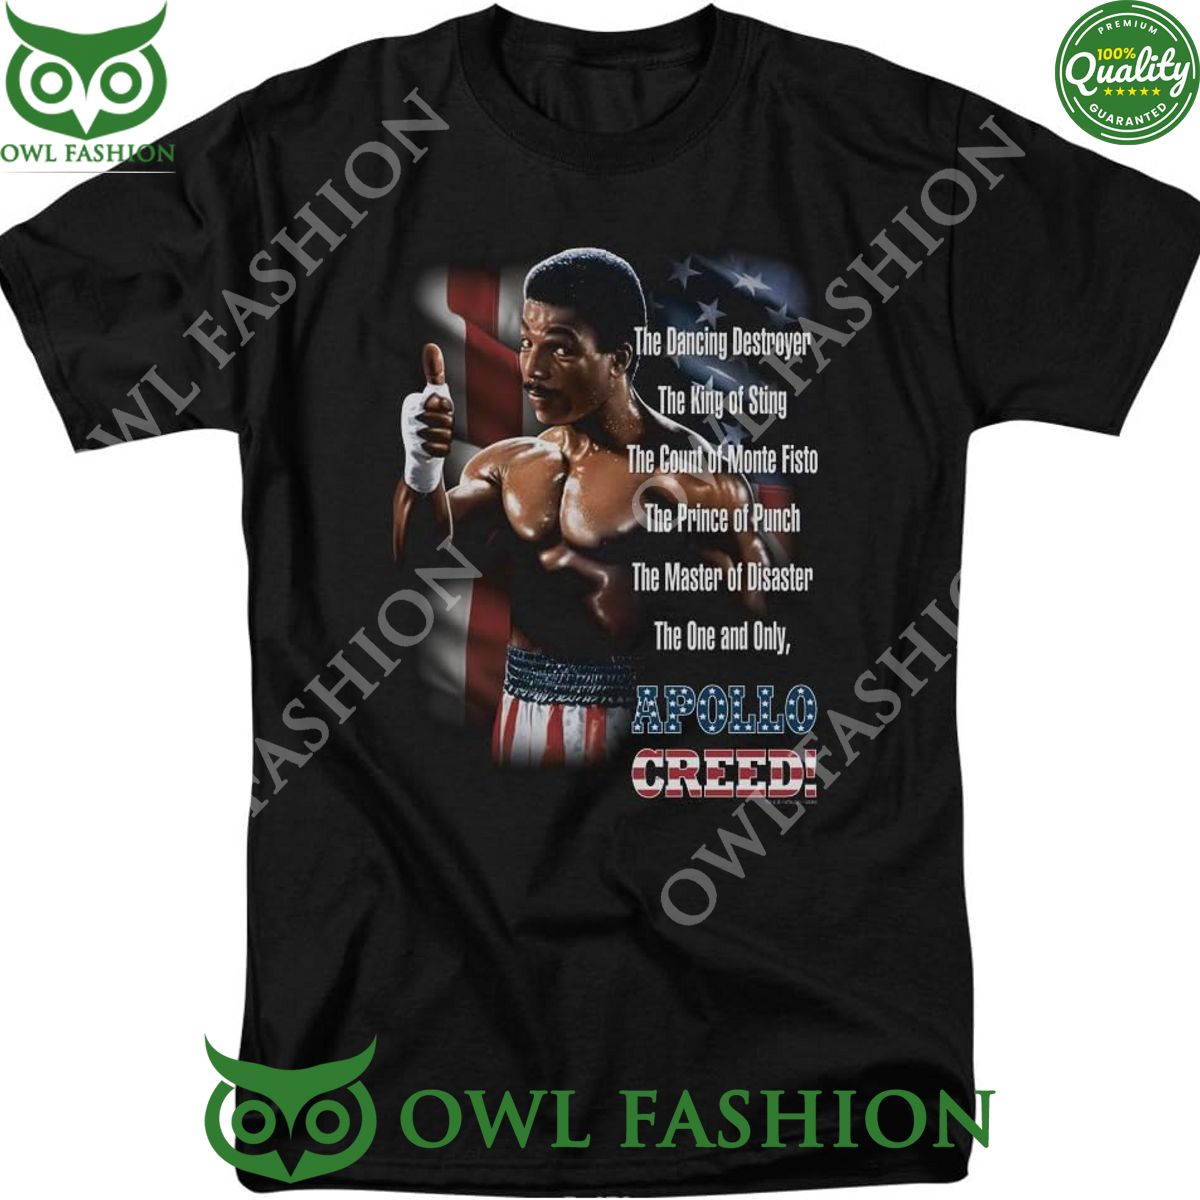 Rocky II One and Only Apollo Creed The Dancing Destroyer Black Tee T-Shirt